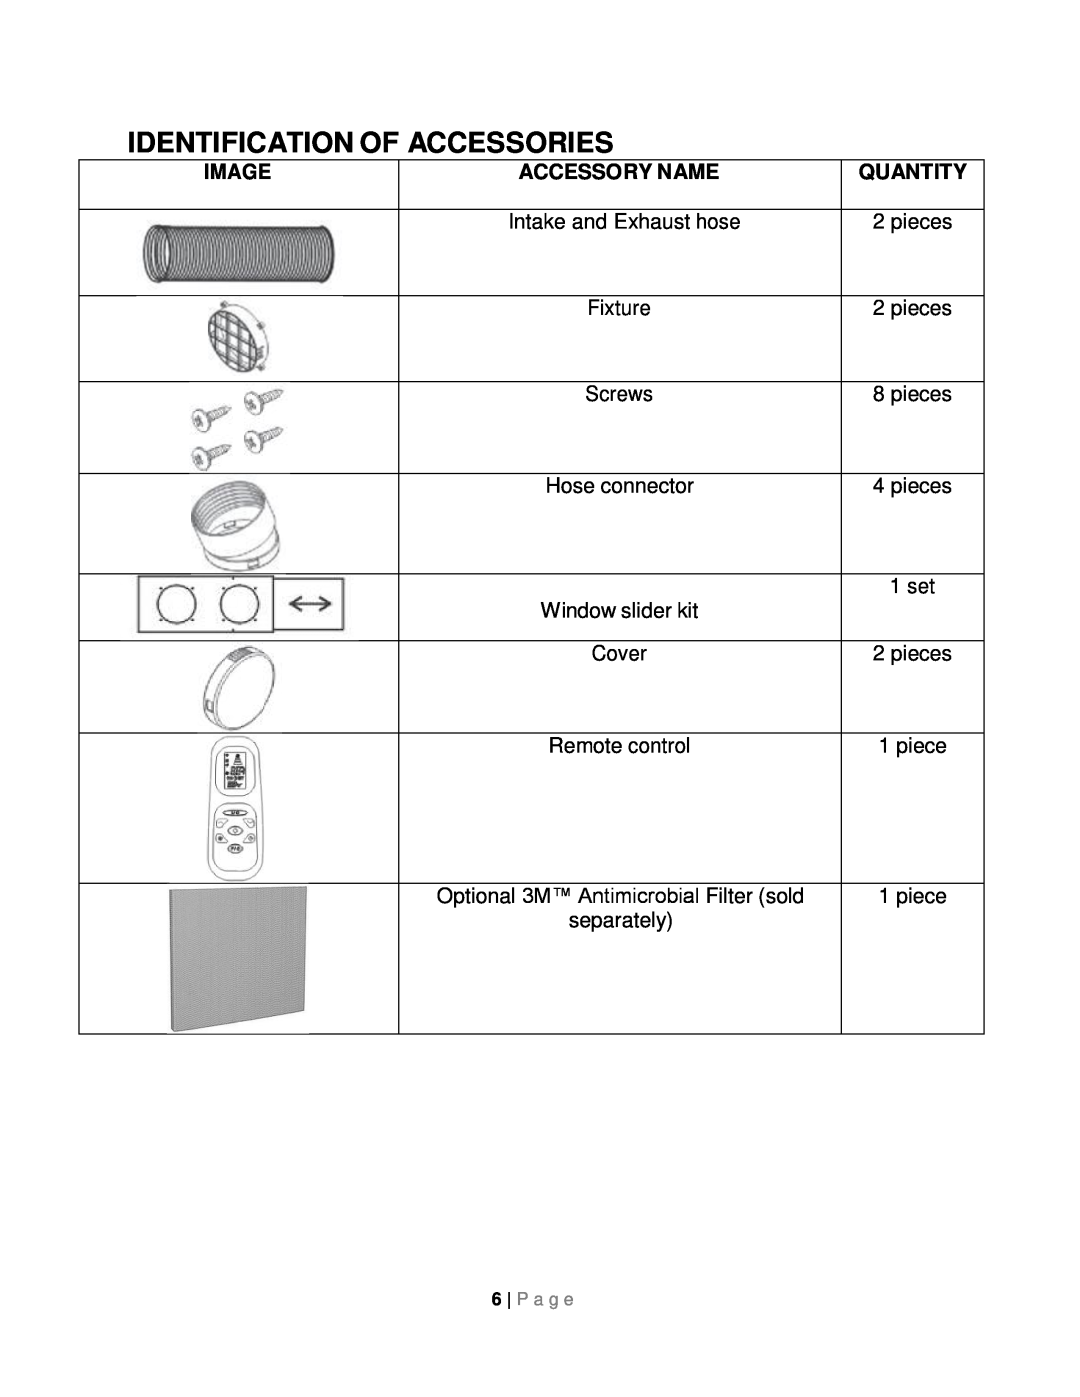 Whynter ARC-14SH instruction manual Identification Of Accessories, Image, Accessory Name, Quantity 